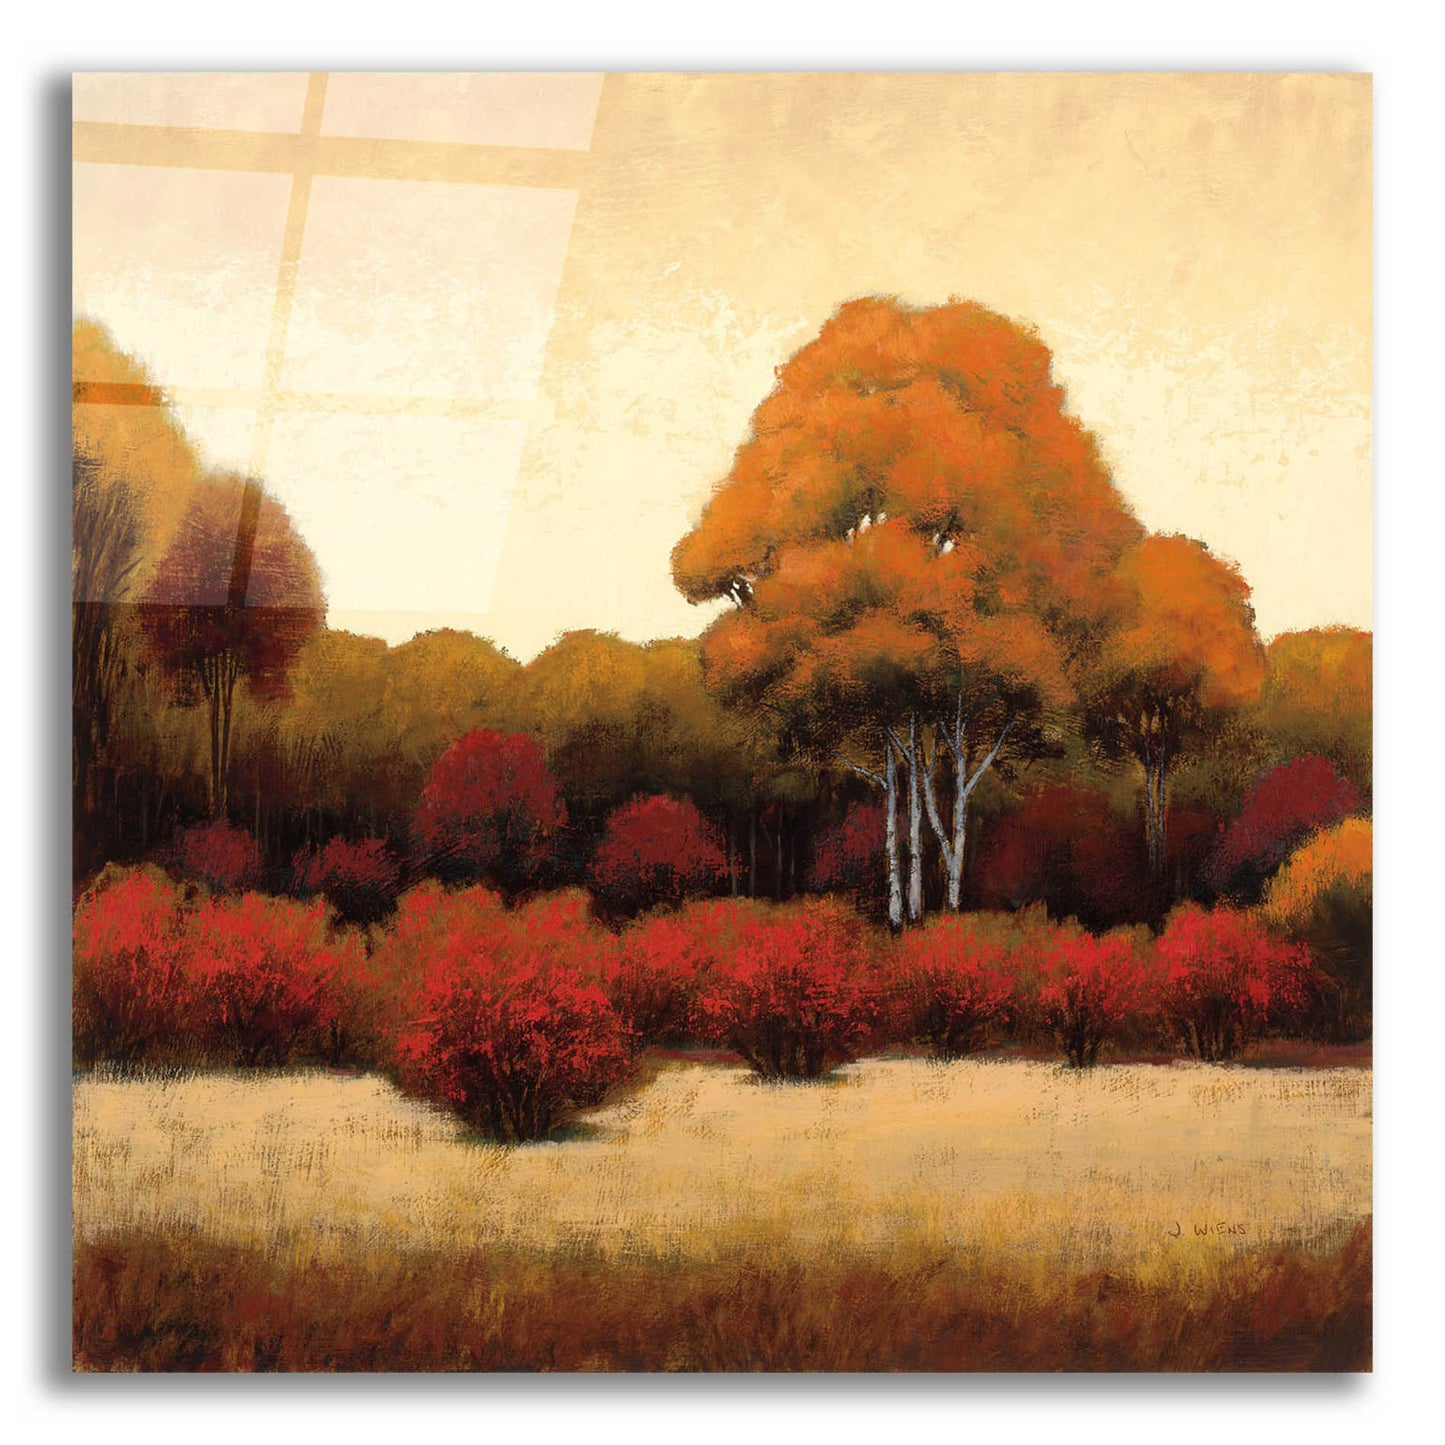 Epic Art 'Autumn Forest I' by James Wiens, Acrylic Glass Wall Art,12x12x1.1x0,18x18x1.1x0,26x26x1.74x0,37x37x1.74x0